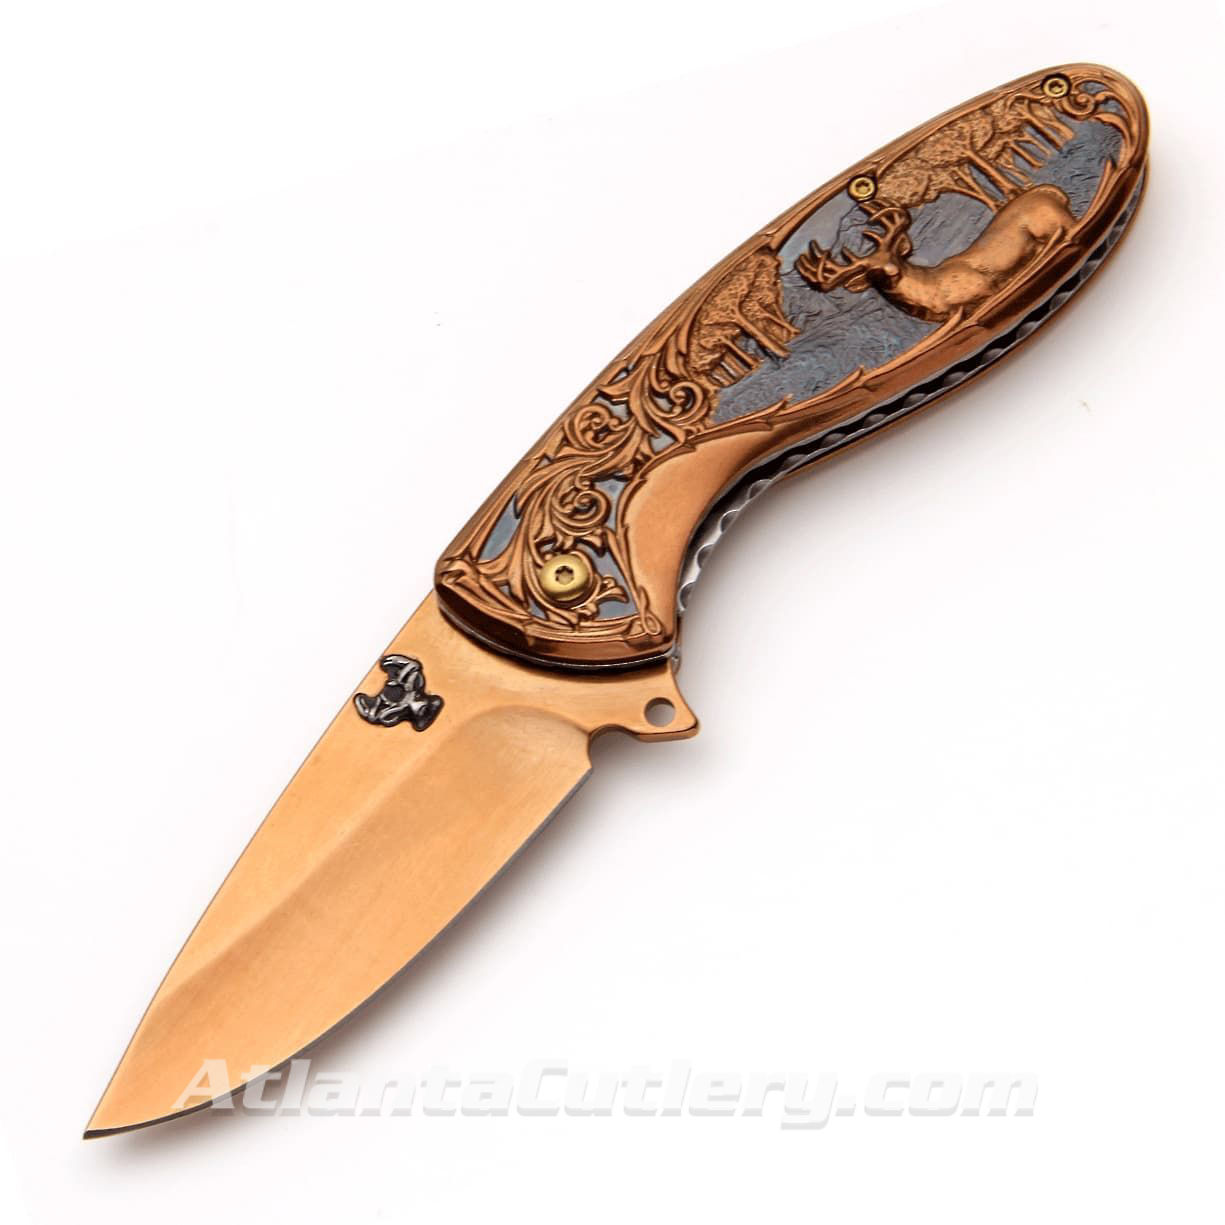 steel scales have relief with outdoor scene of a stag roaming the woods, scales and the stainless steel blade are bronzed